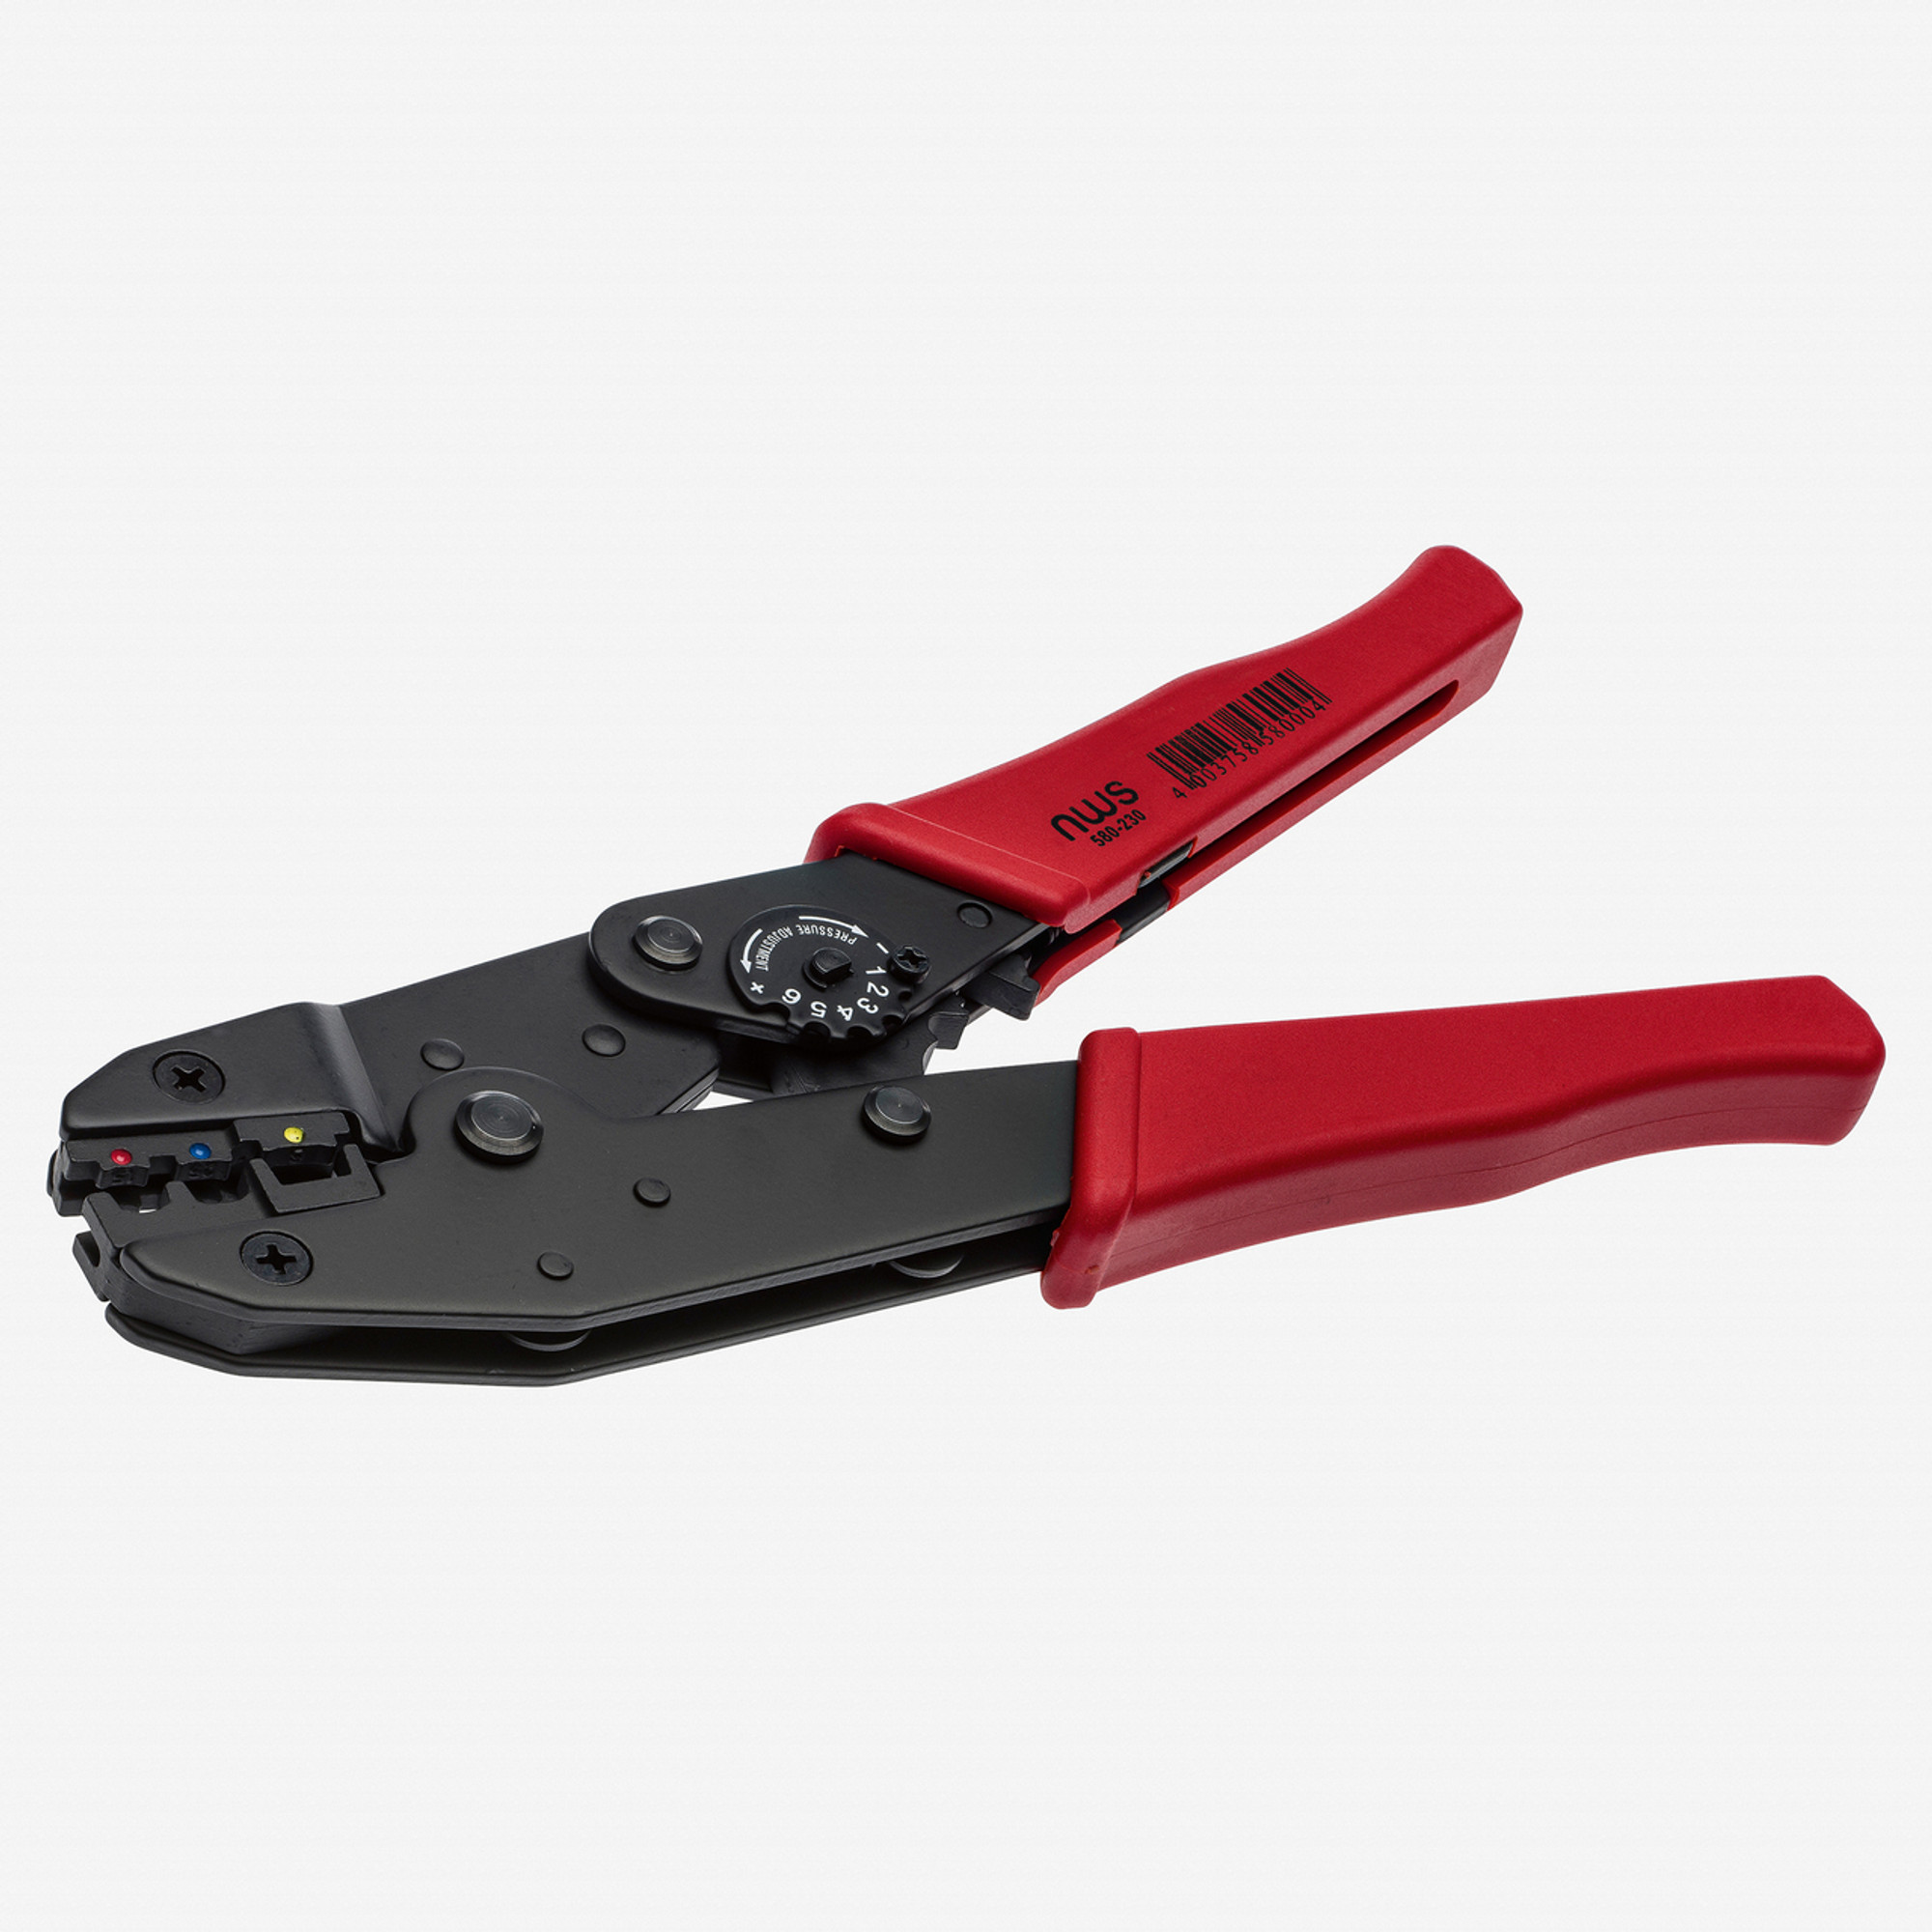 NWS 580-230 9" Crimping Lever Pliers for Terminals - KC Tool